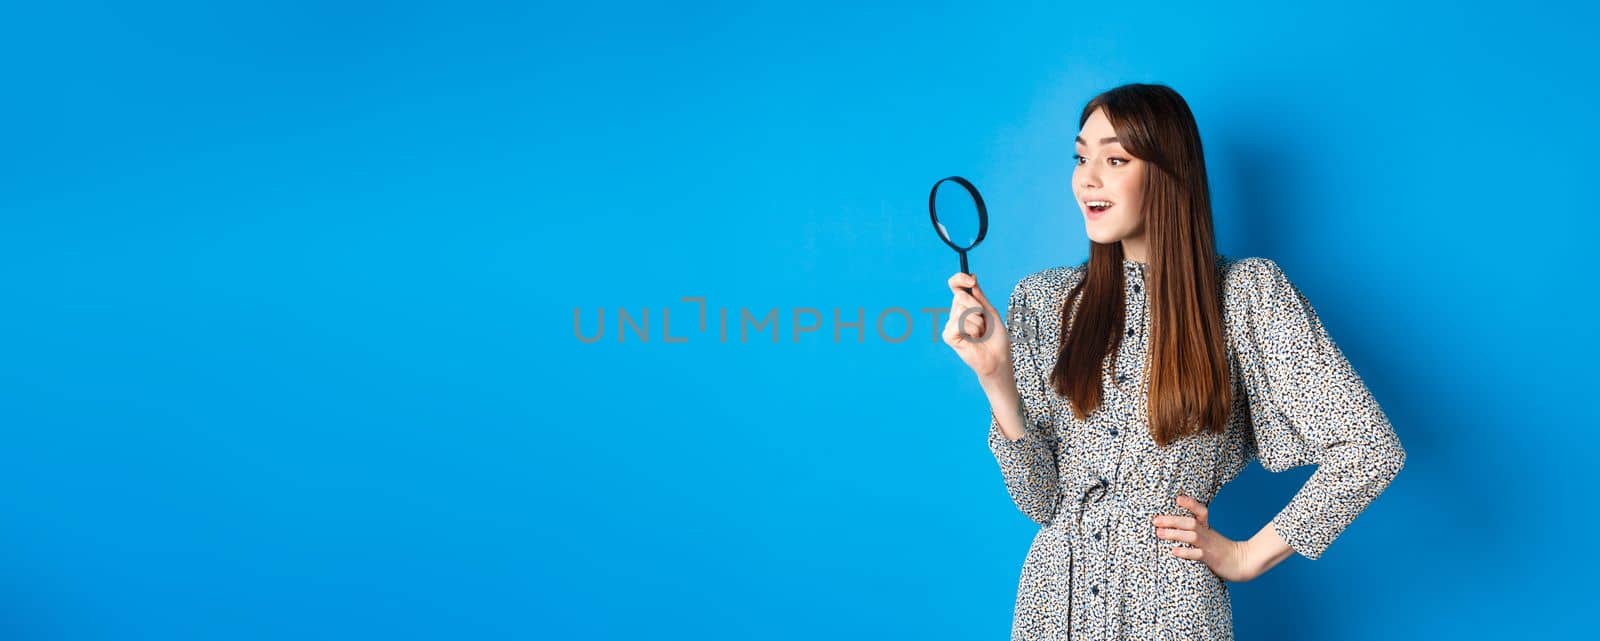 Excited girl looking left with magnifying glass, found interesting promo, investigating or searching, standing on blue background.